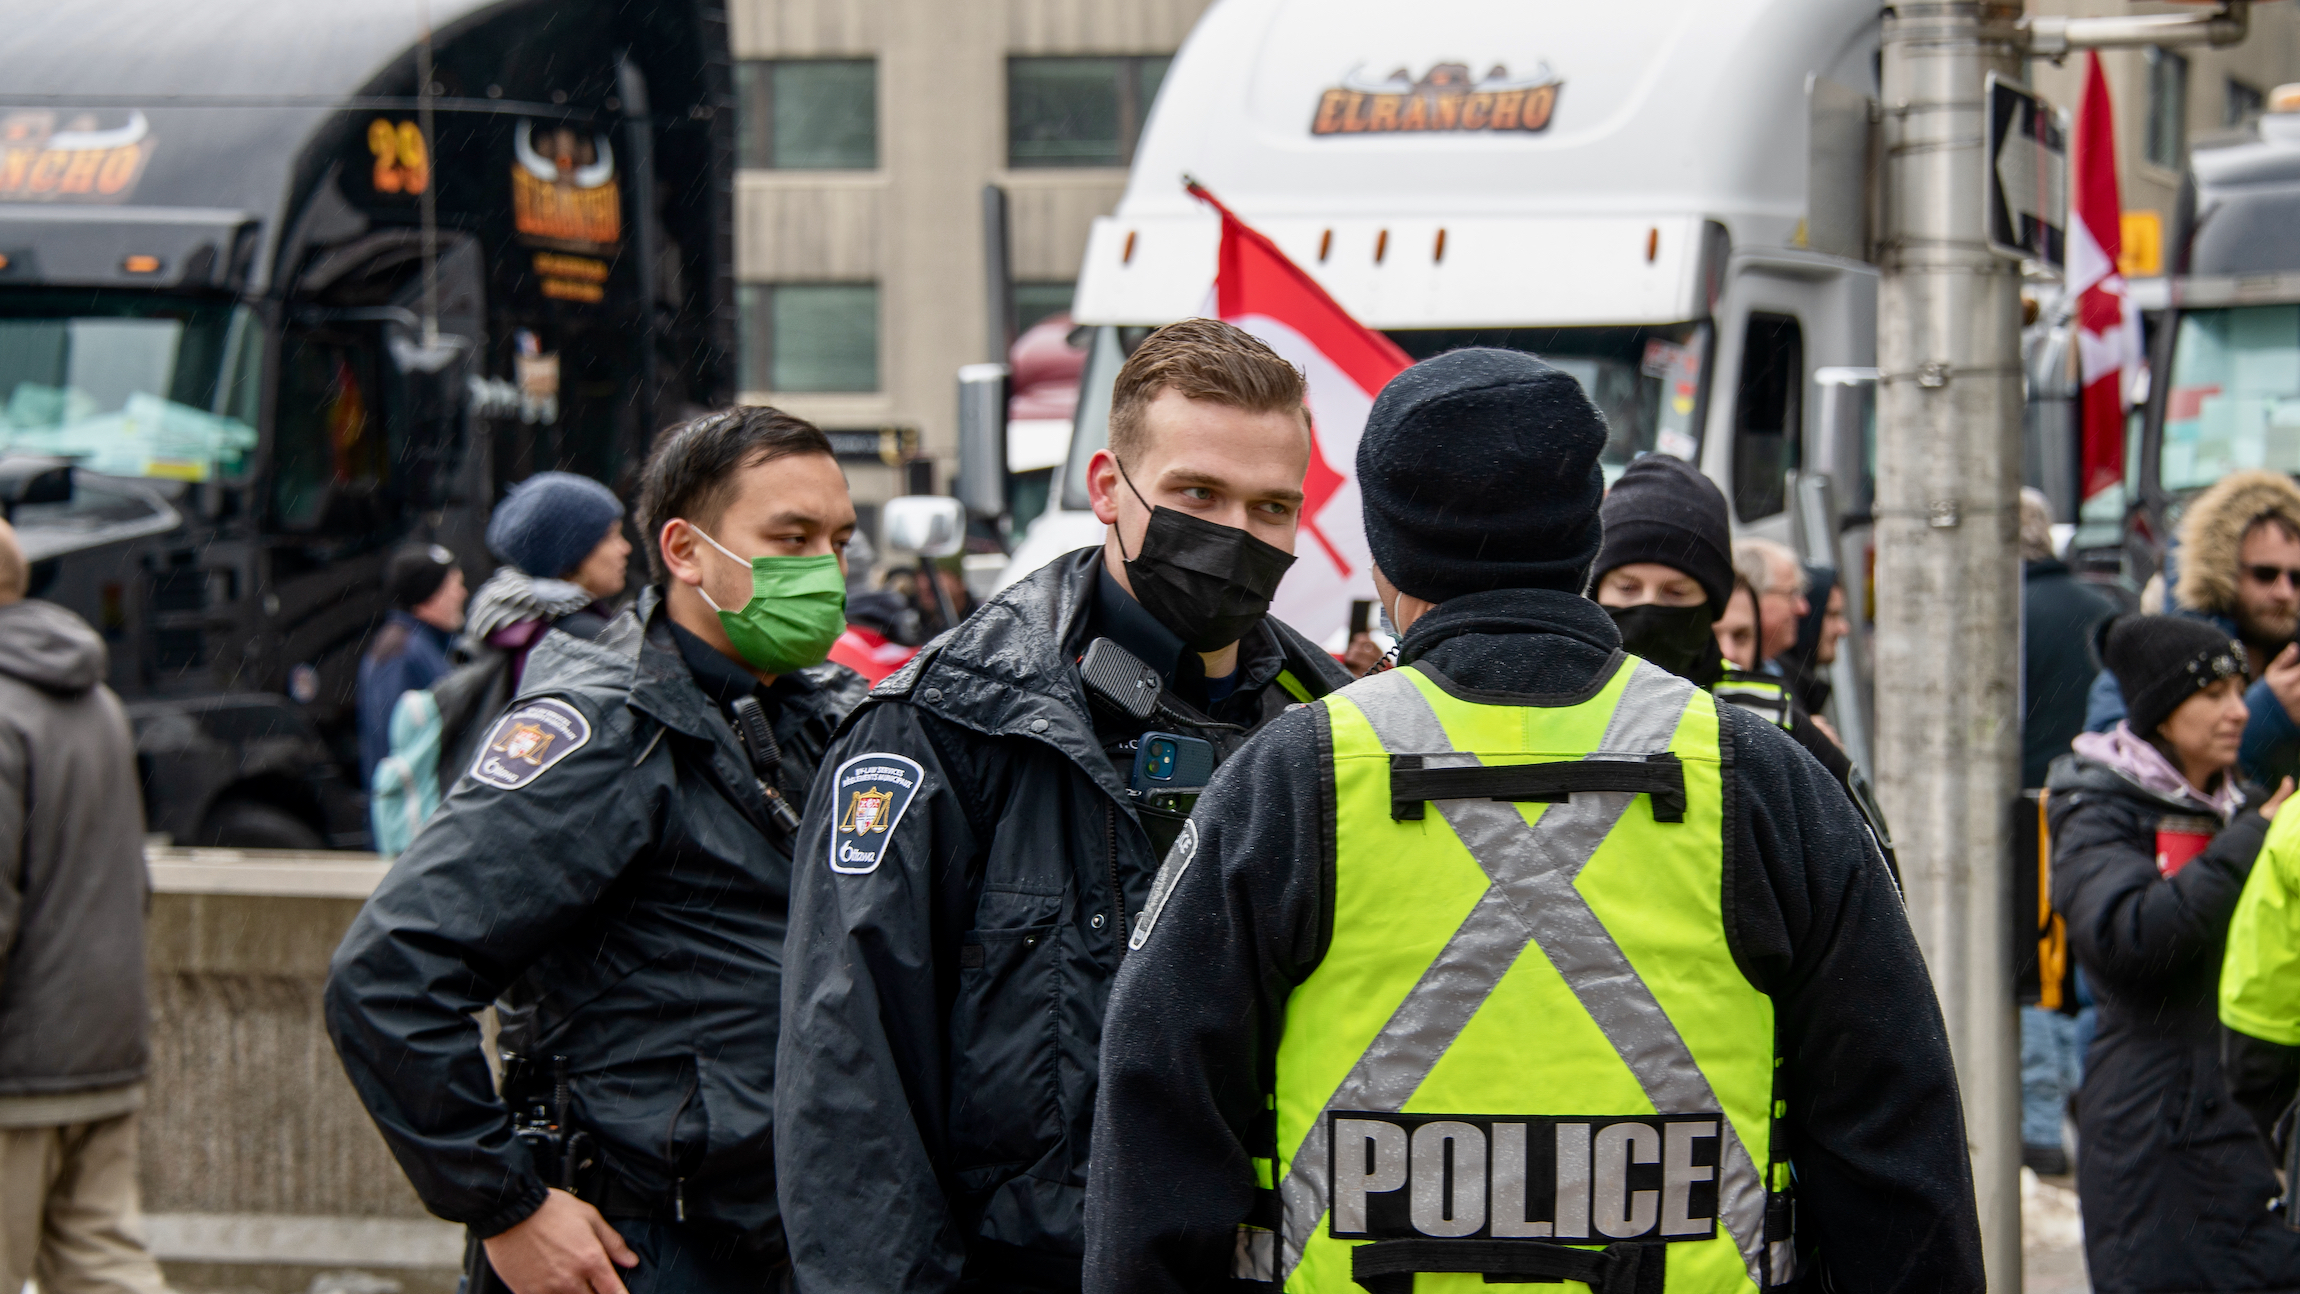 Police officers are seen in front of trucks at a protest in Ottawa